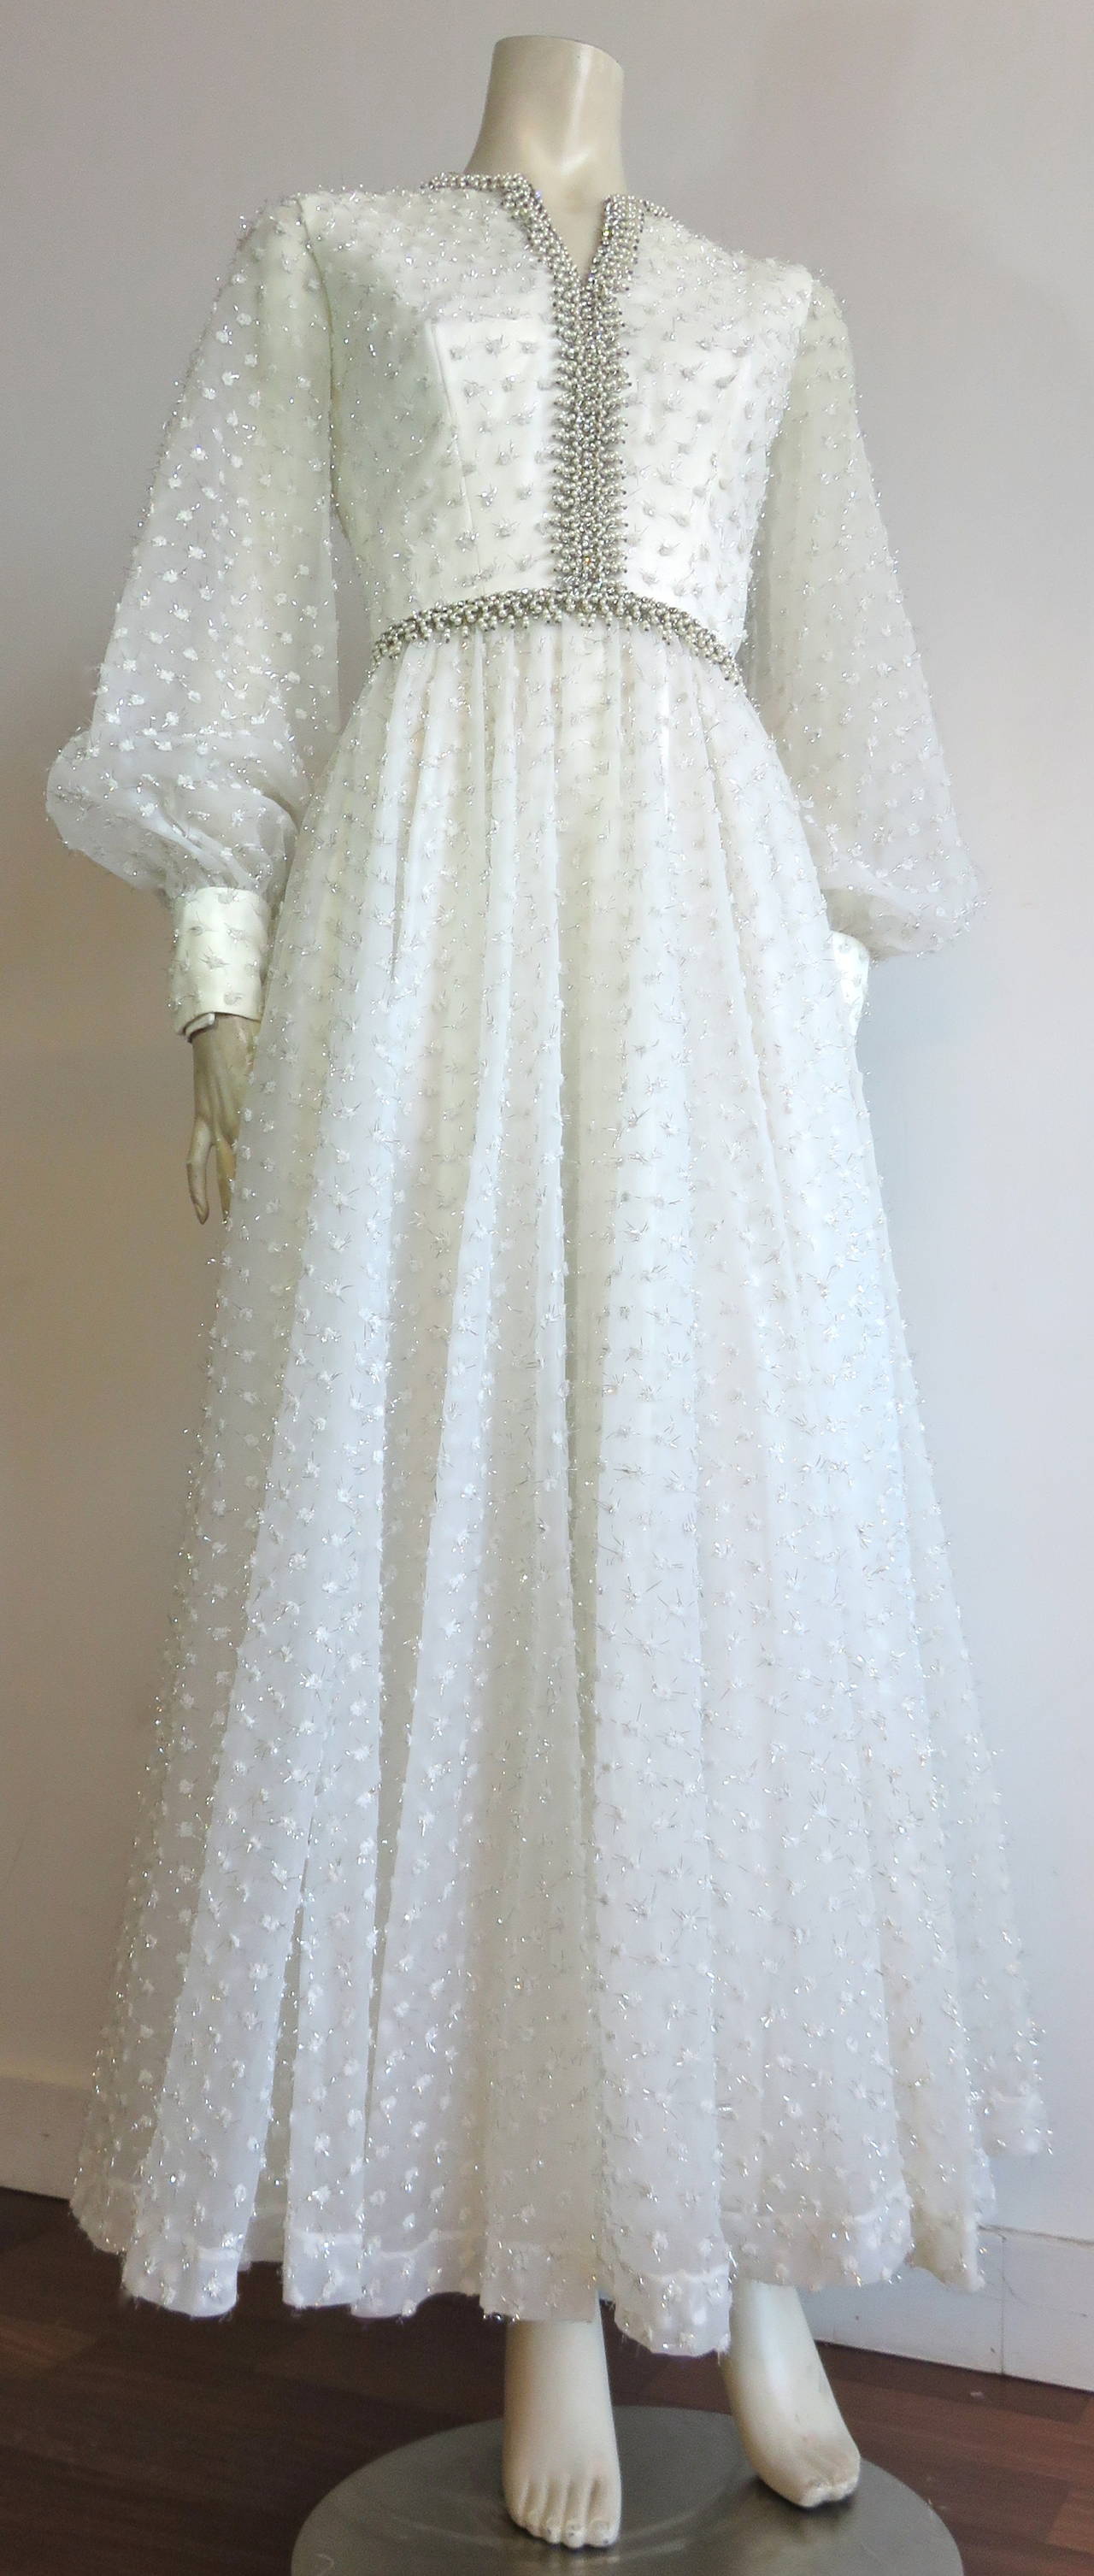 Excellent condition, 1960's, ROSE TAFT Couture dress with pearl beading.

Dazzling, pearl-white dress with all-over chenille, and metallic silver, Swiss-dot patterning.  The plush, mini-pom dots of the Swiss-dot patterning is accented with